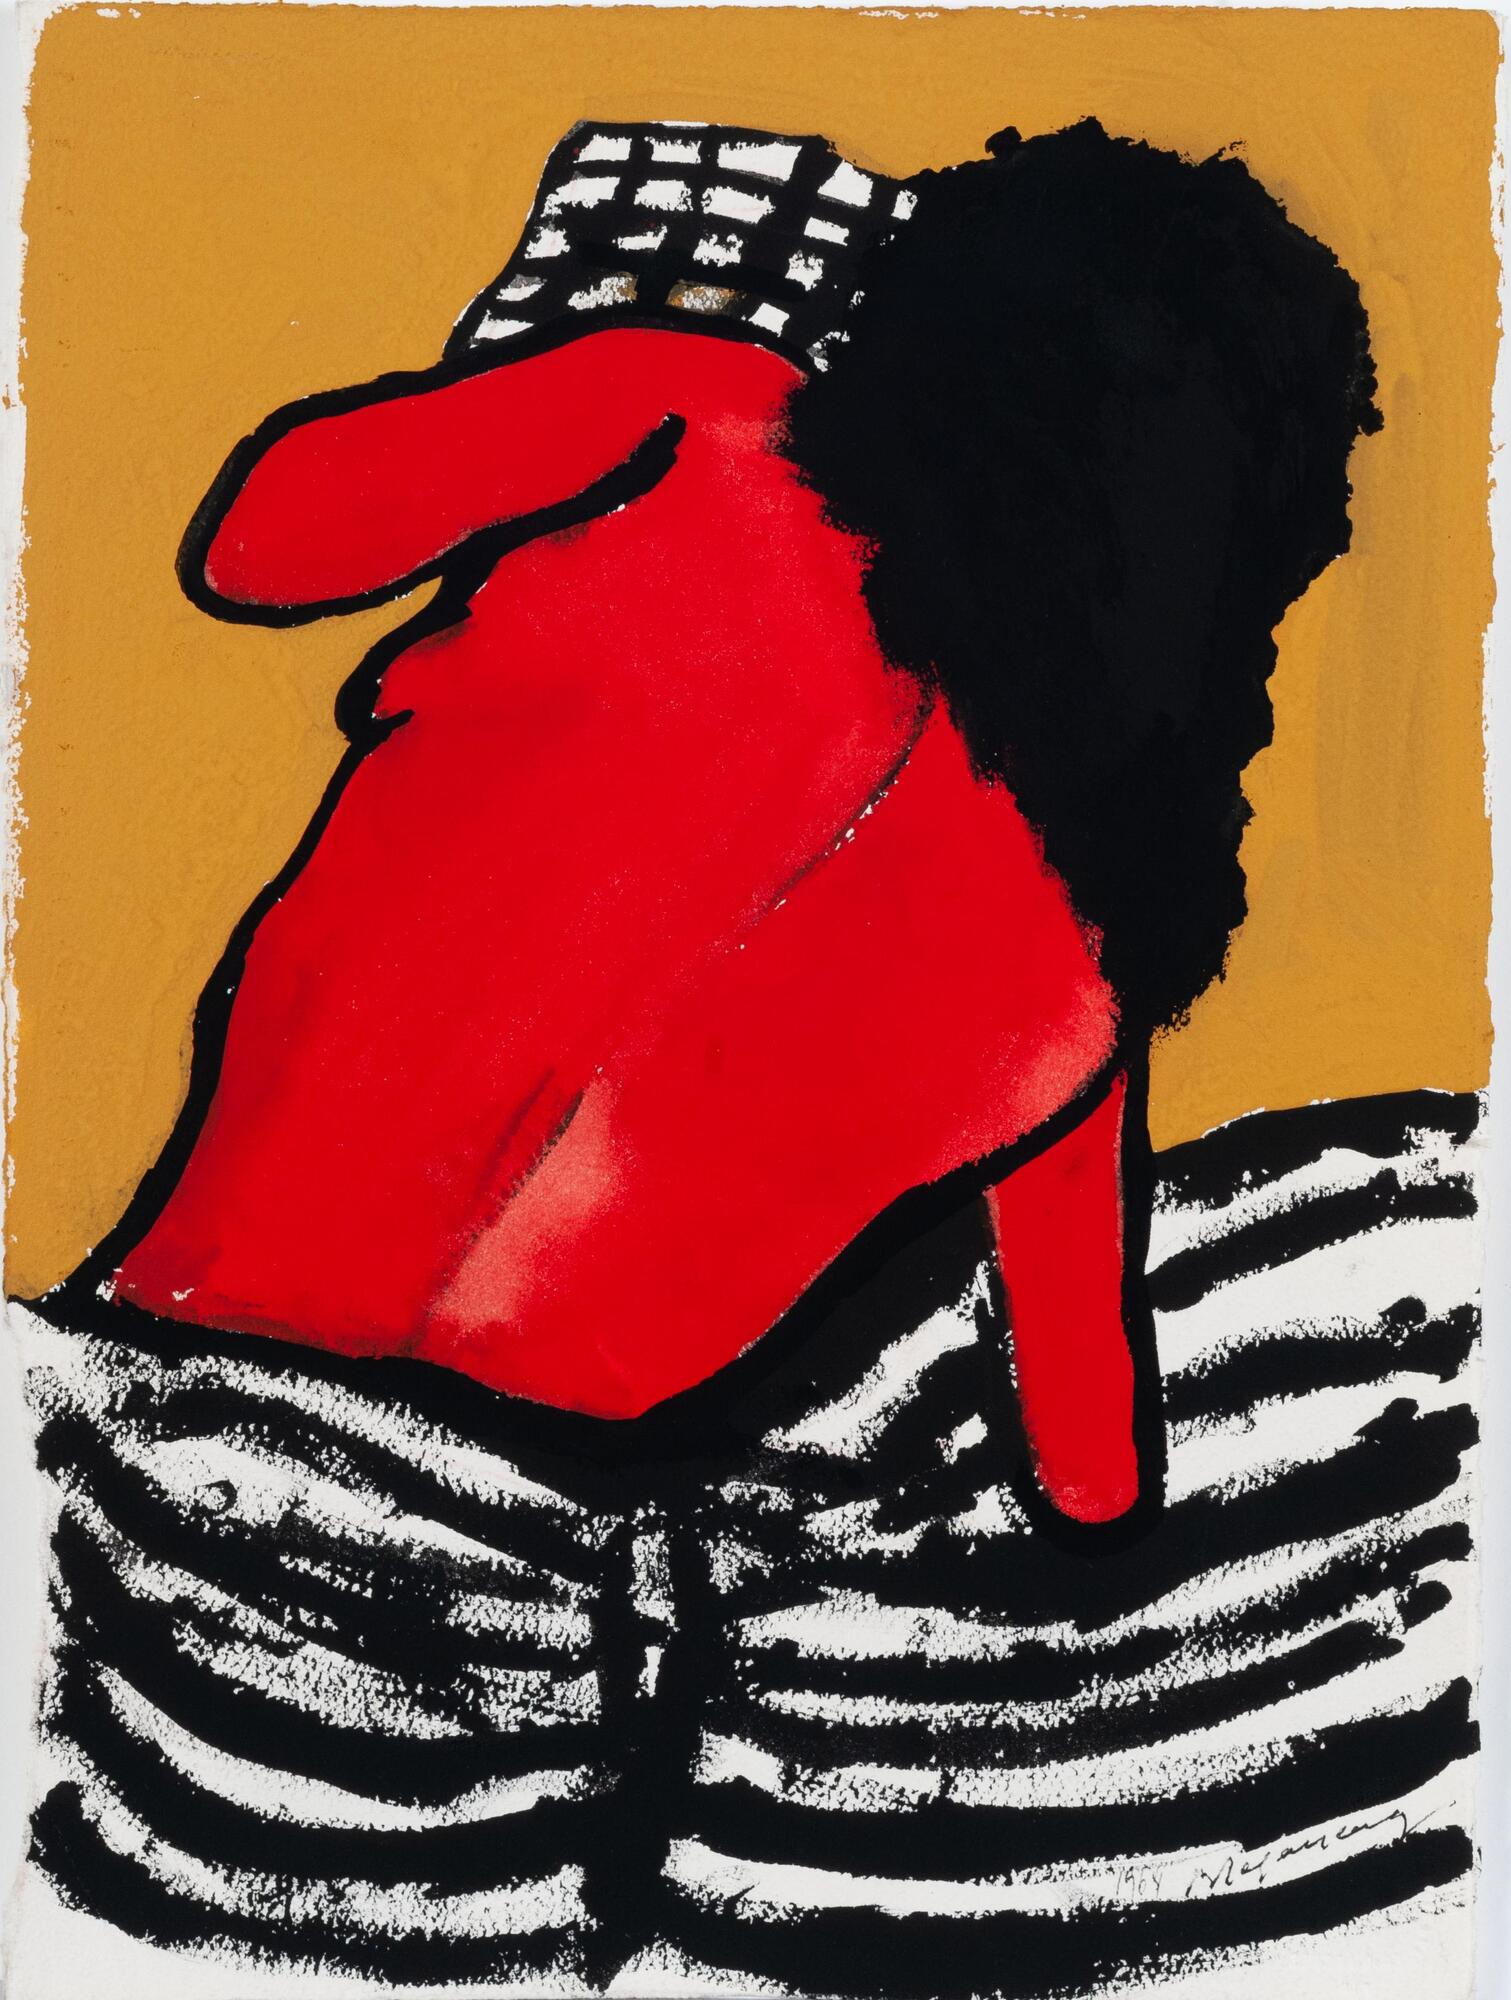 An image of a woman with red skin and black hair with her back to the viewer. The bottom half of her body is covered by a black and white striped blanket.&nbsp;